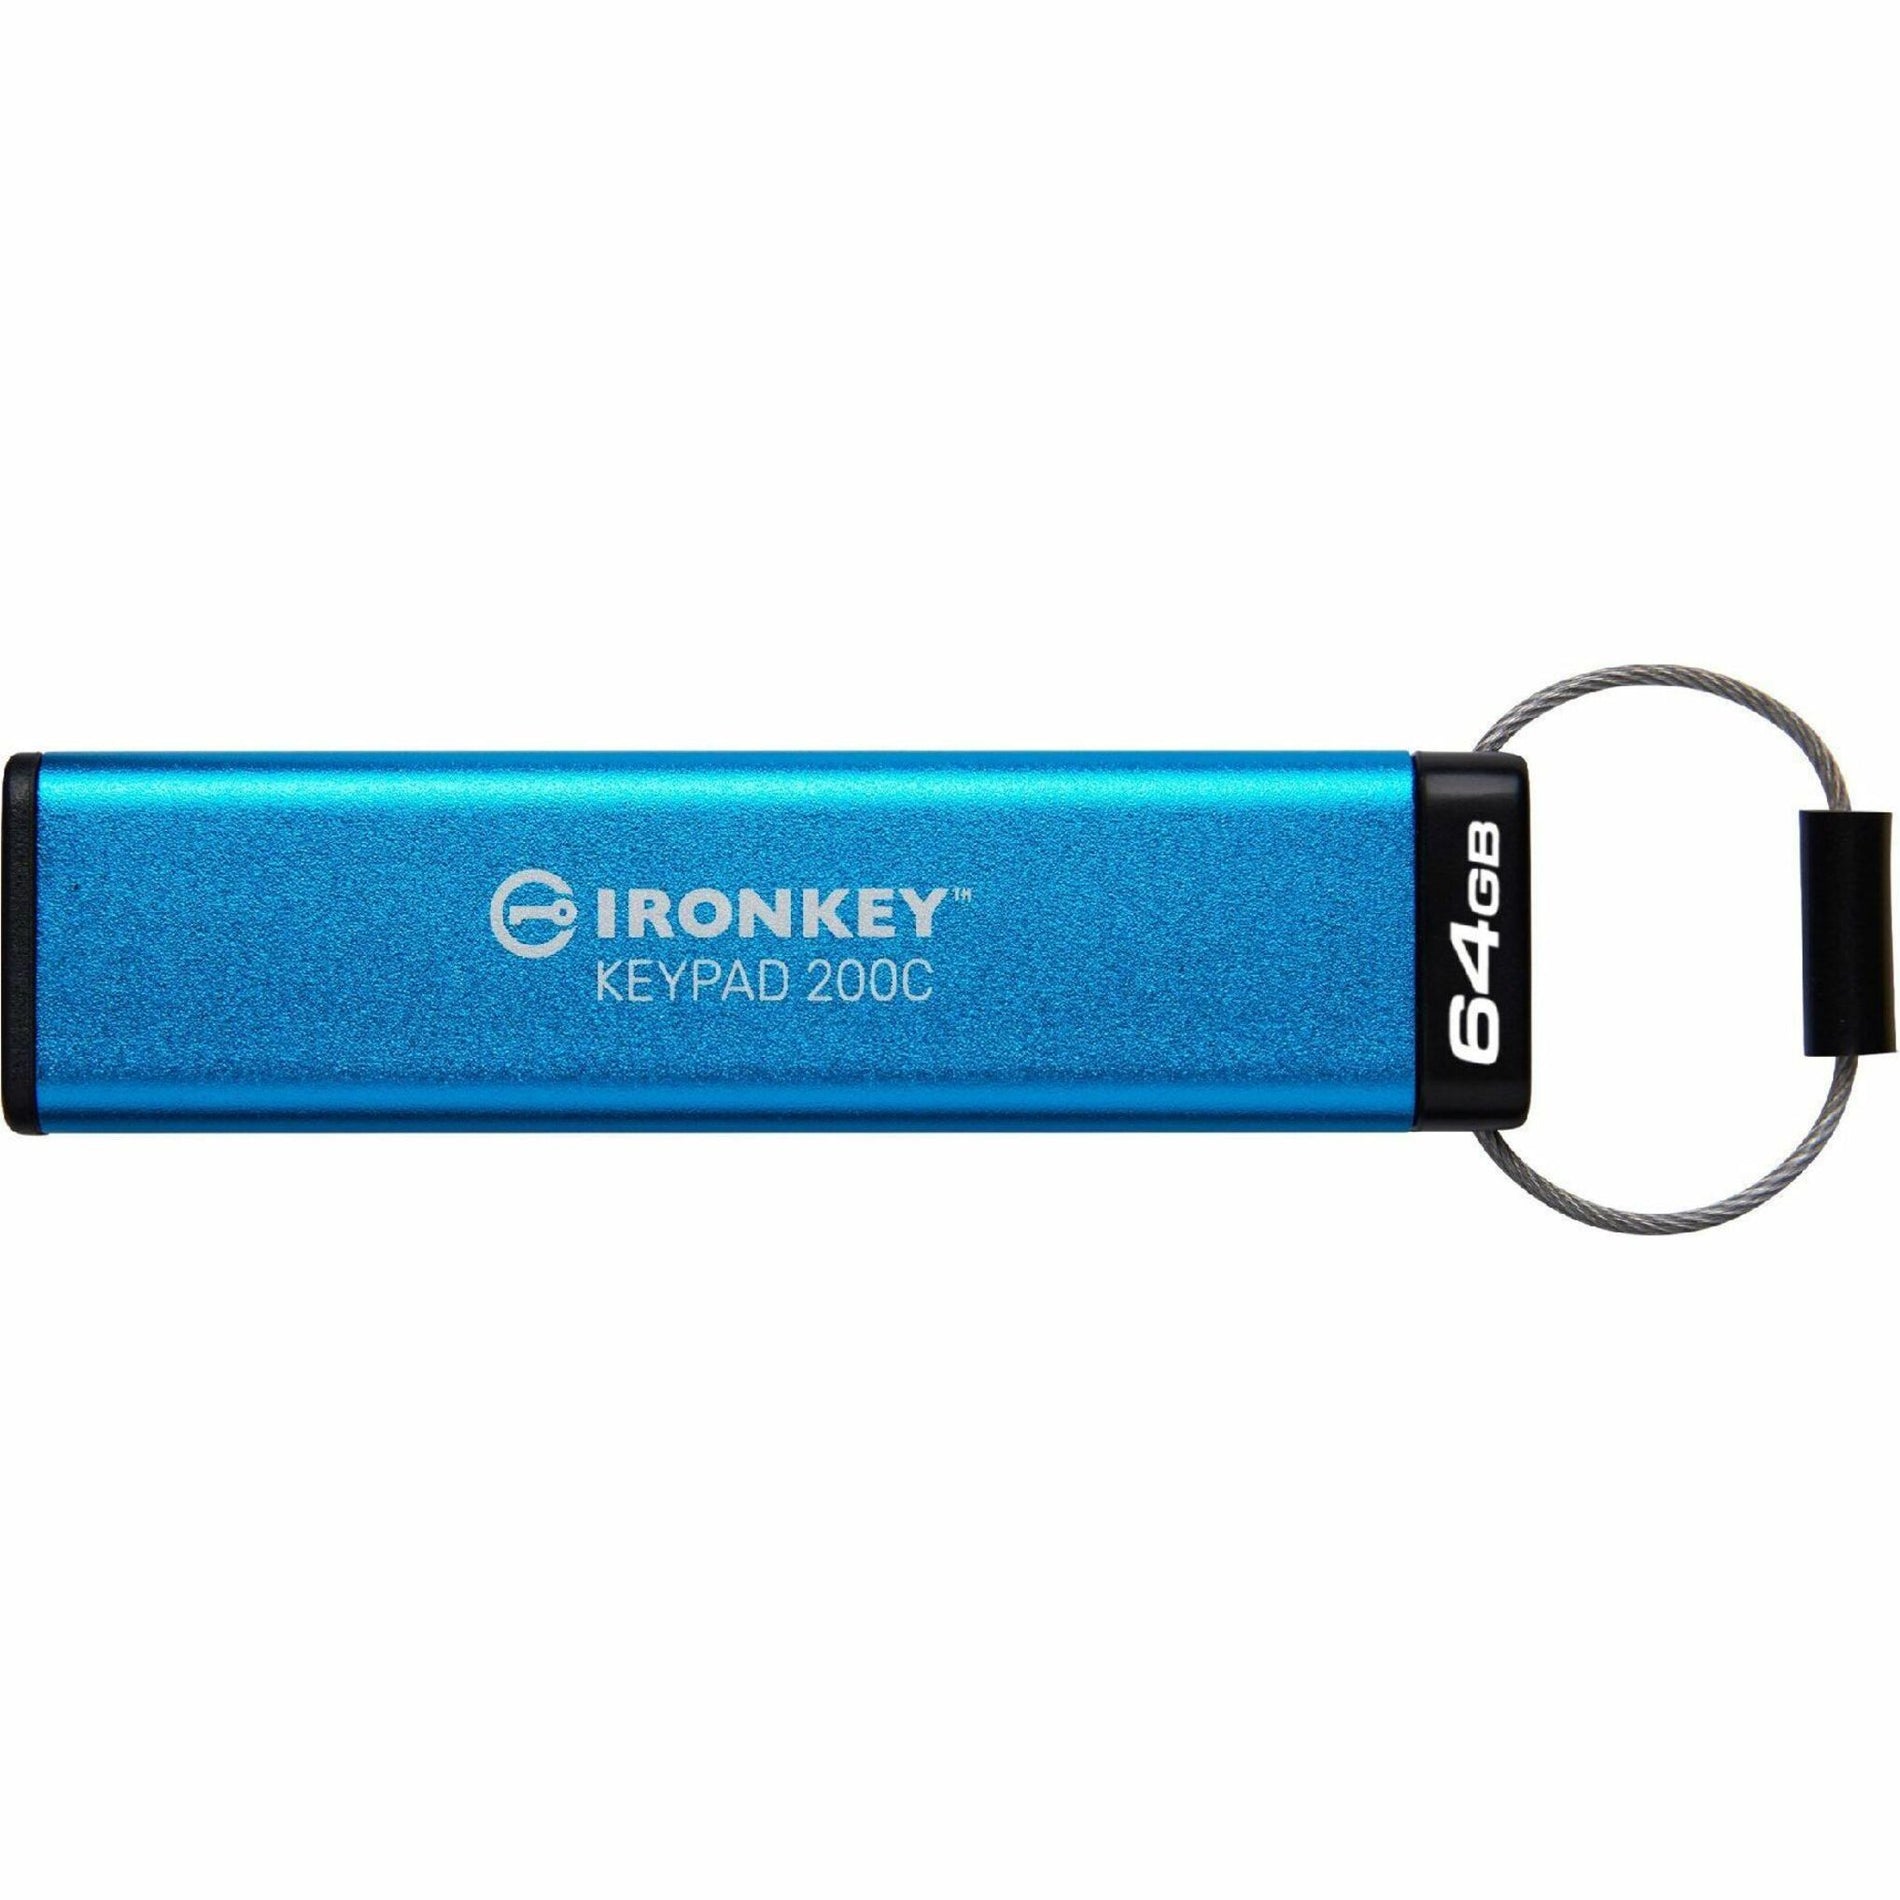 IronKey IKKP200C/64GB Keypad 200 64GB USB 3.2 (Gen 1) Type C Flash Drive, Secure, Password Protected, Water and Dust Proof